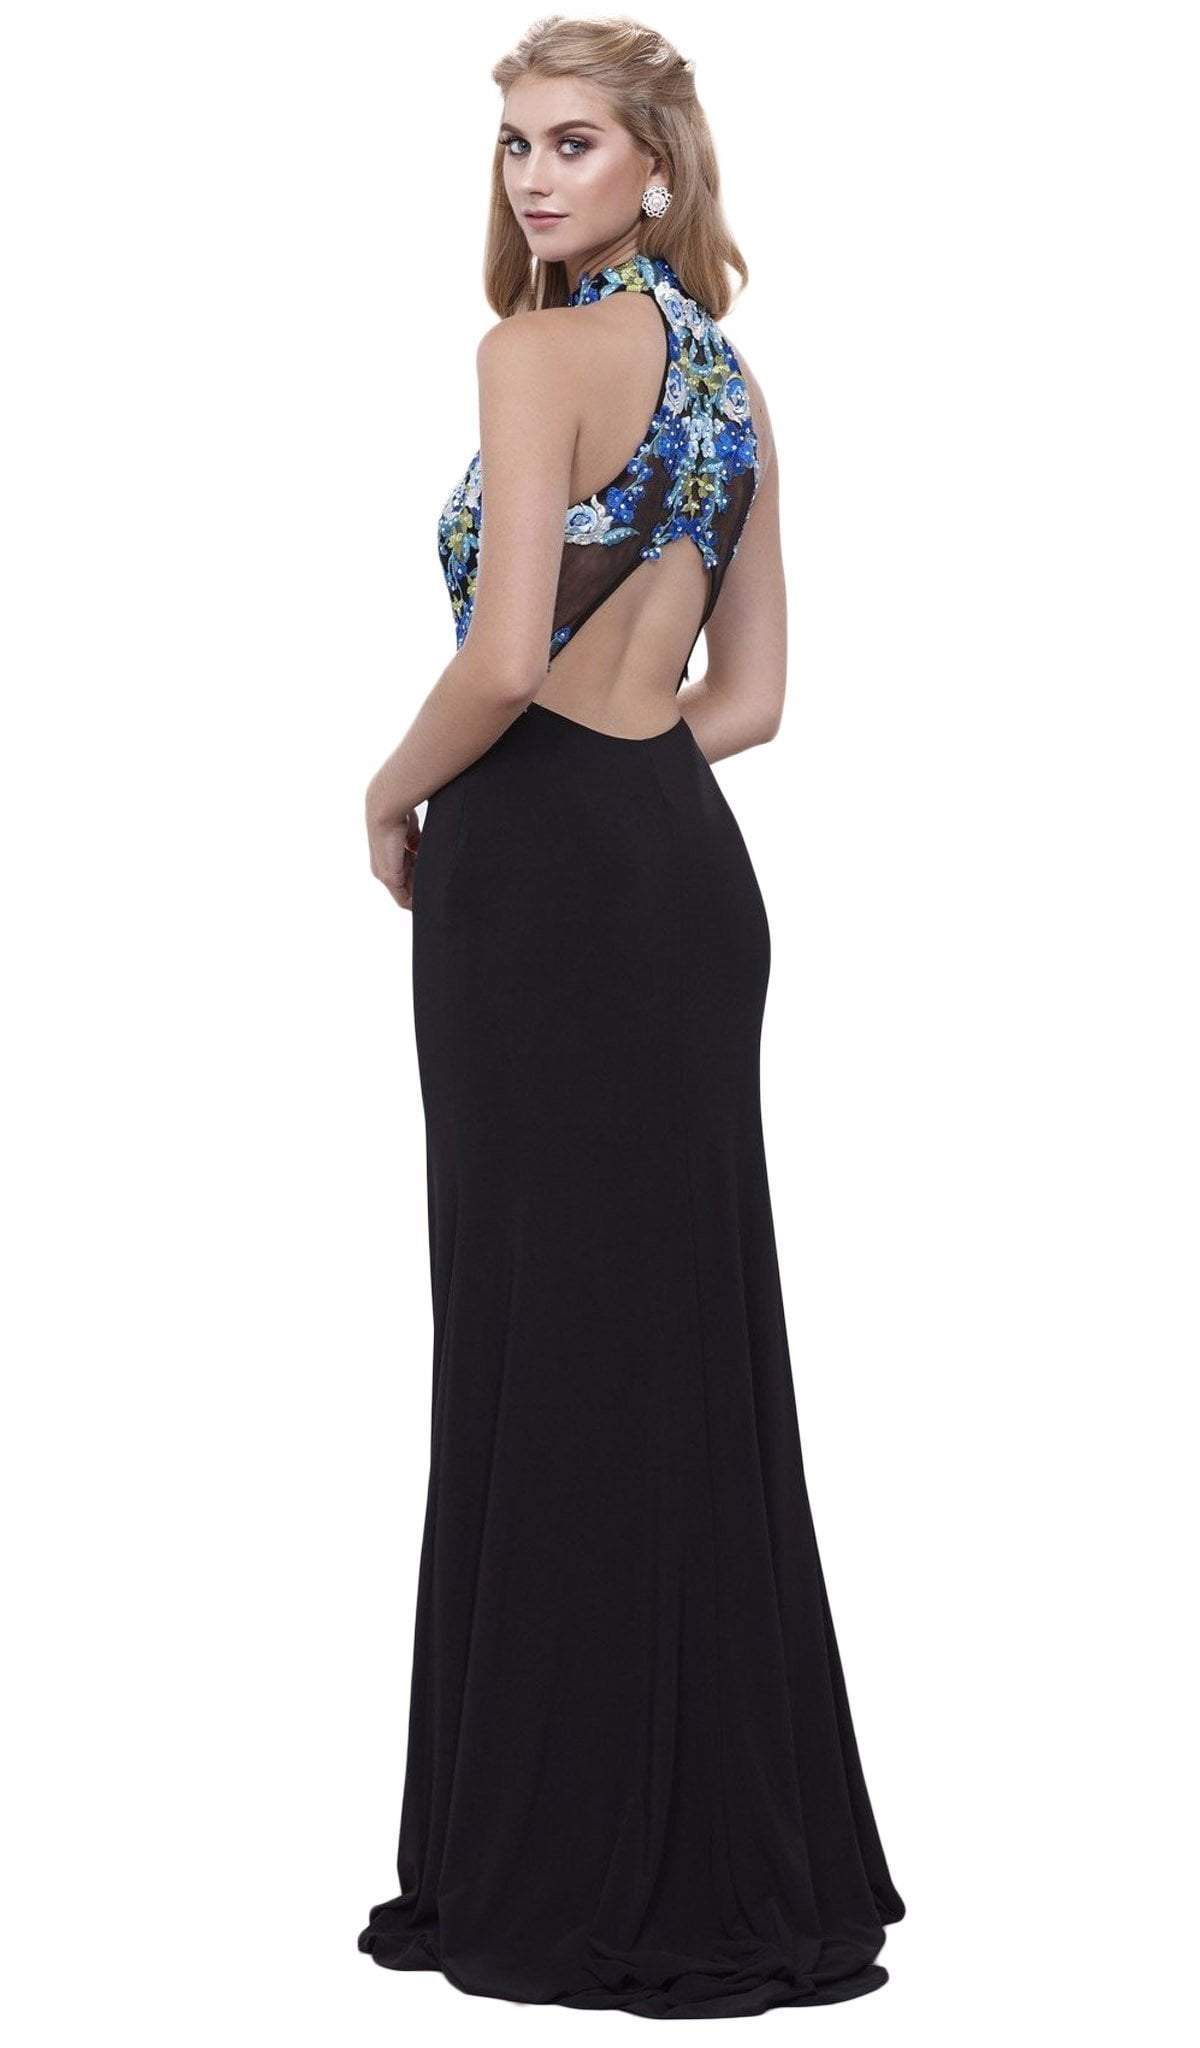 Nox Anabel - 8375 Sleeveless Laced Halter Jersey Evening Dress Special Occasion Dress